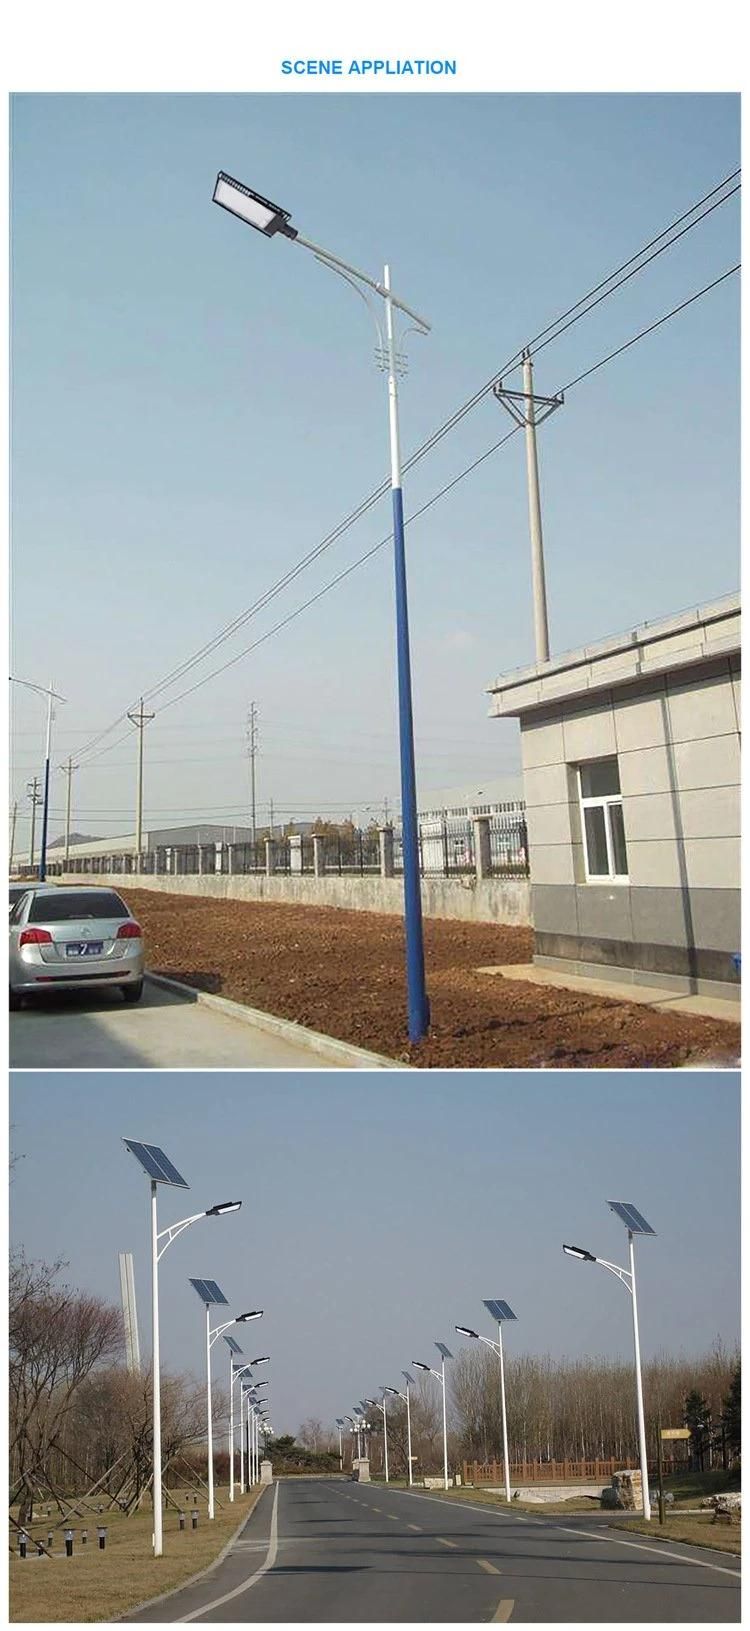 High Brightness 150W Intergrated All in One Street Light Outdoor Solar Lamp